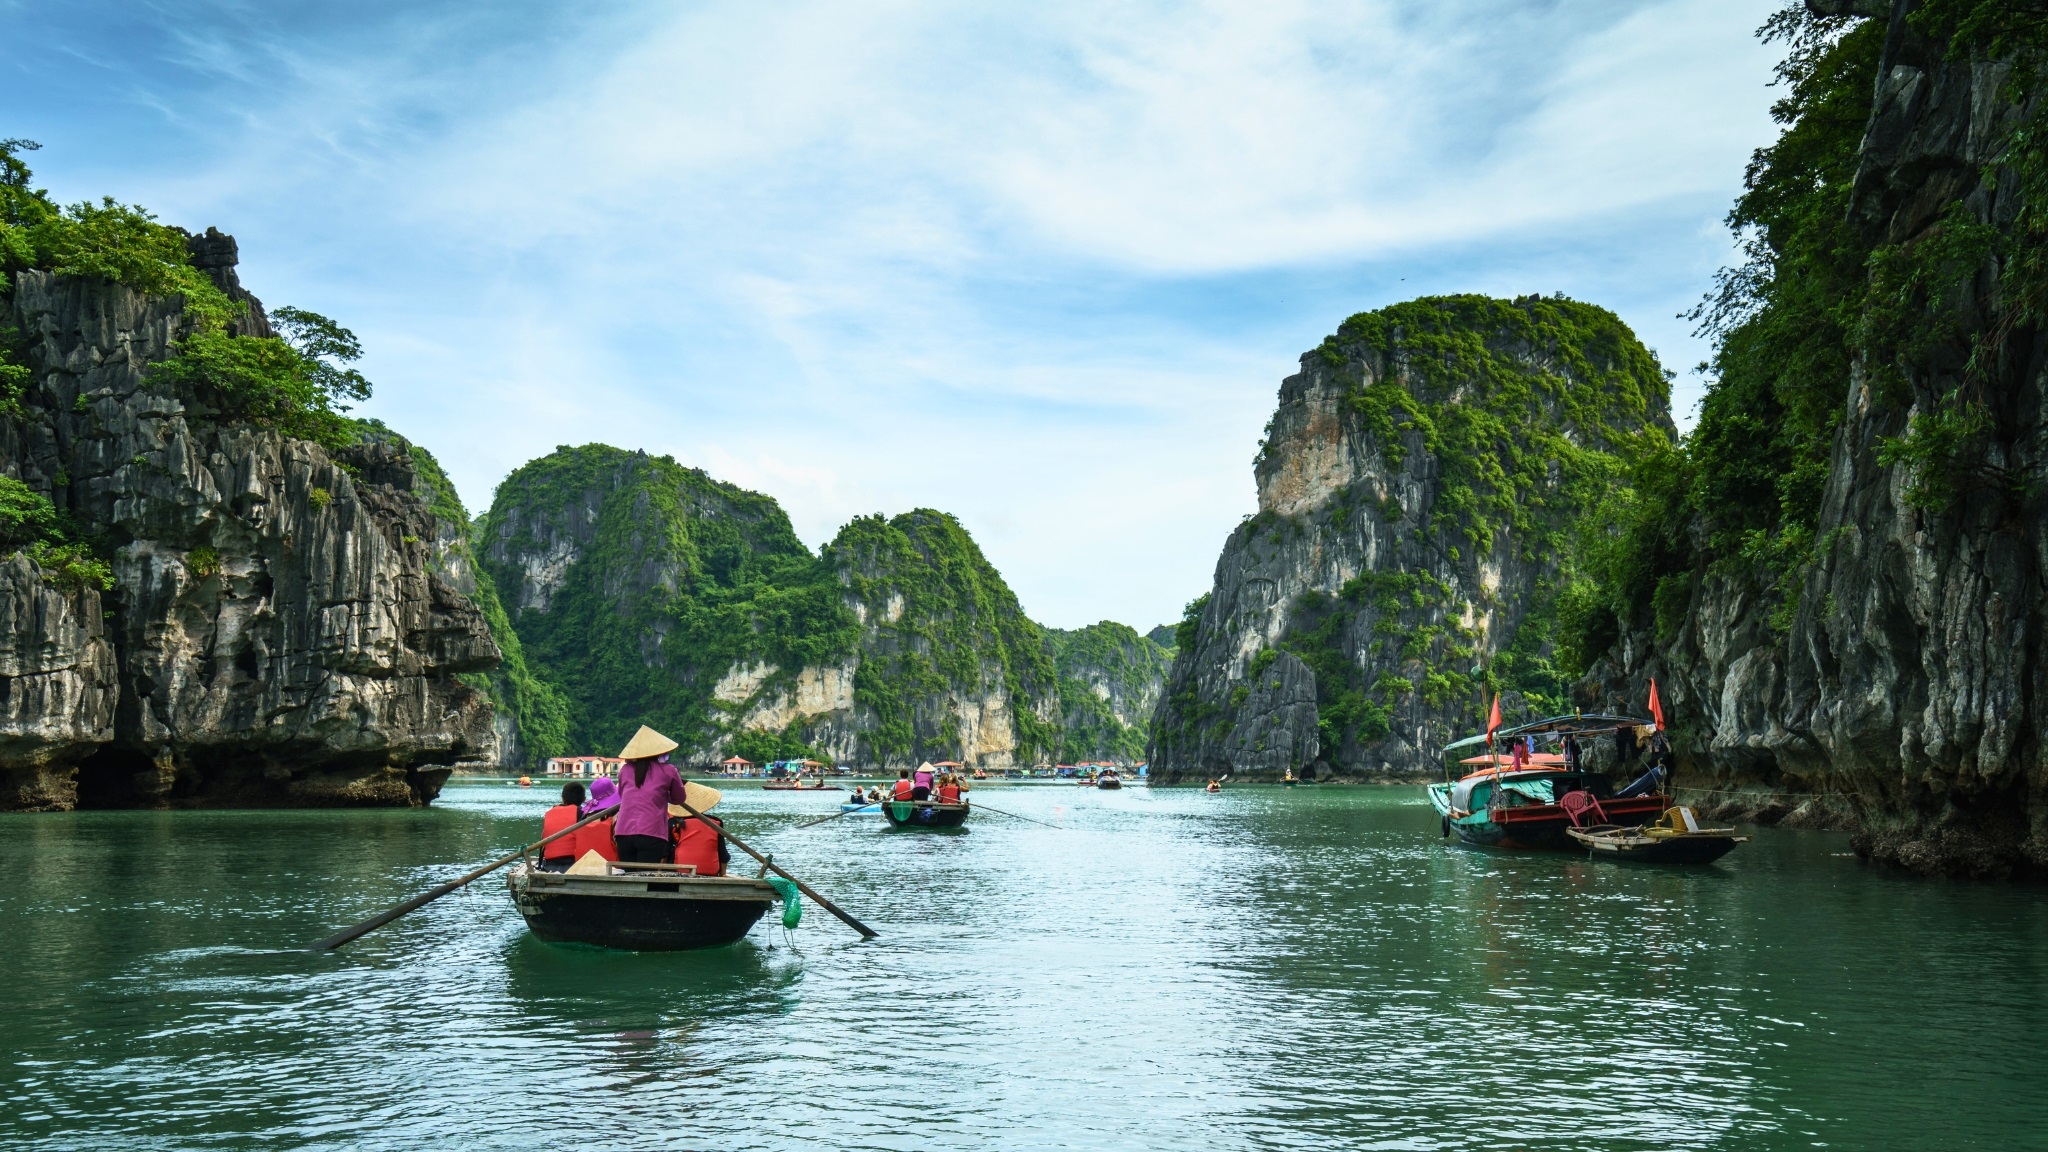 Halong Bay One Of 7 Natural Wonders Of The World